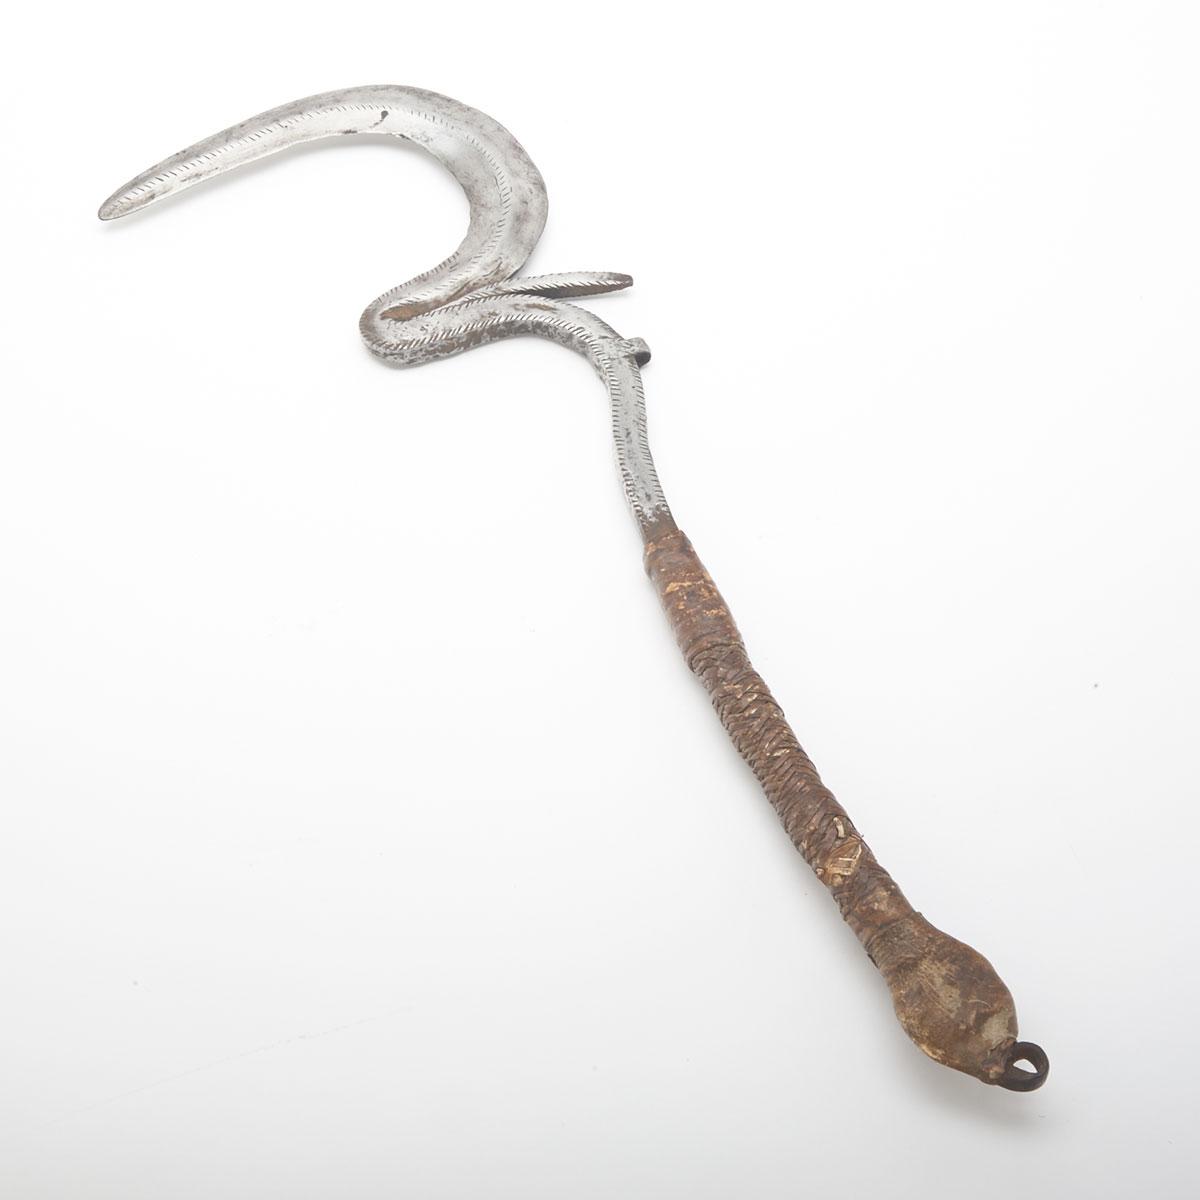 African Matakam Thowing Knife (Sengese), North Cameroon, 19th/20th century